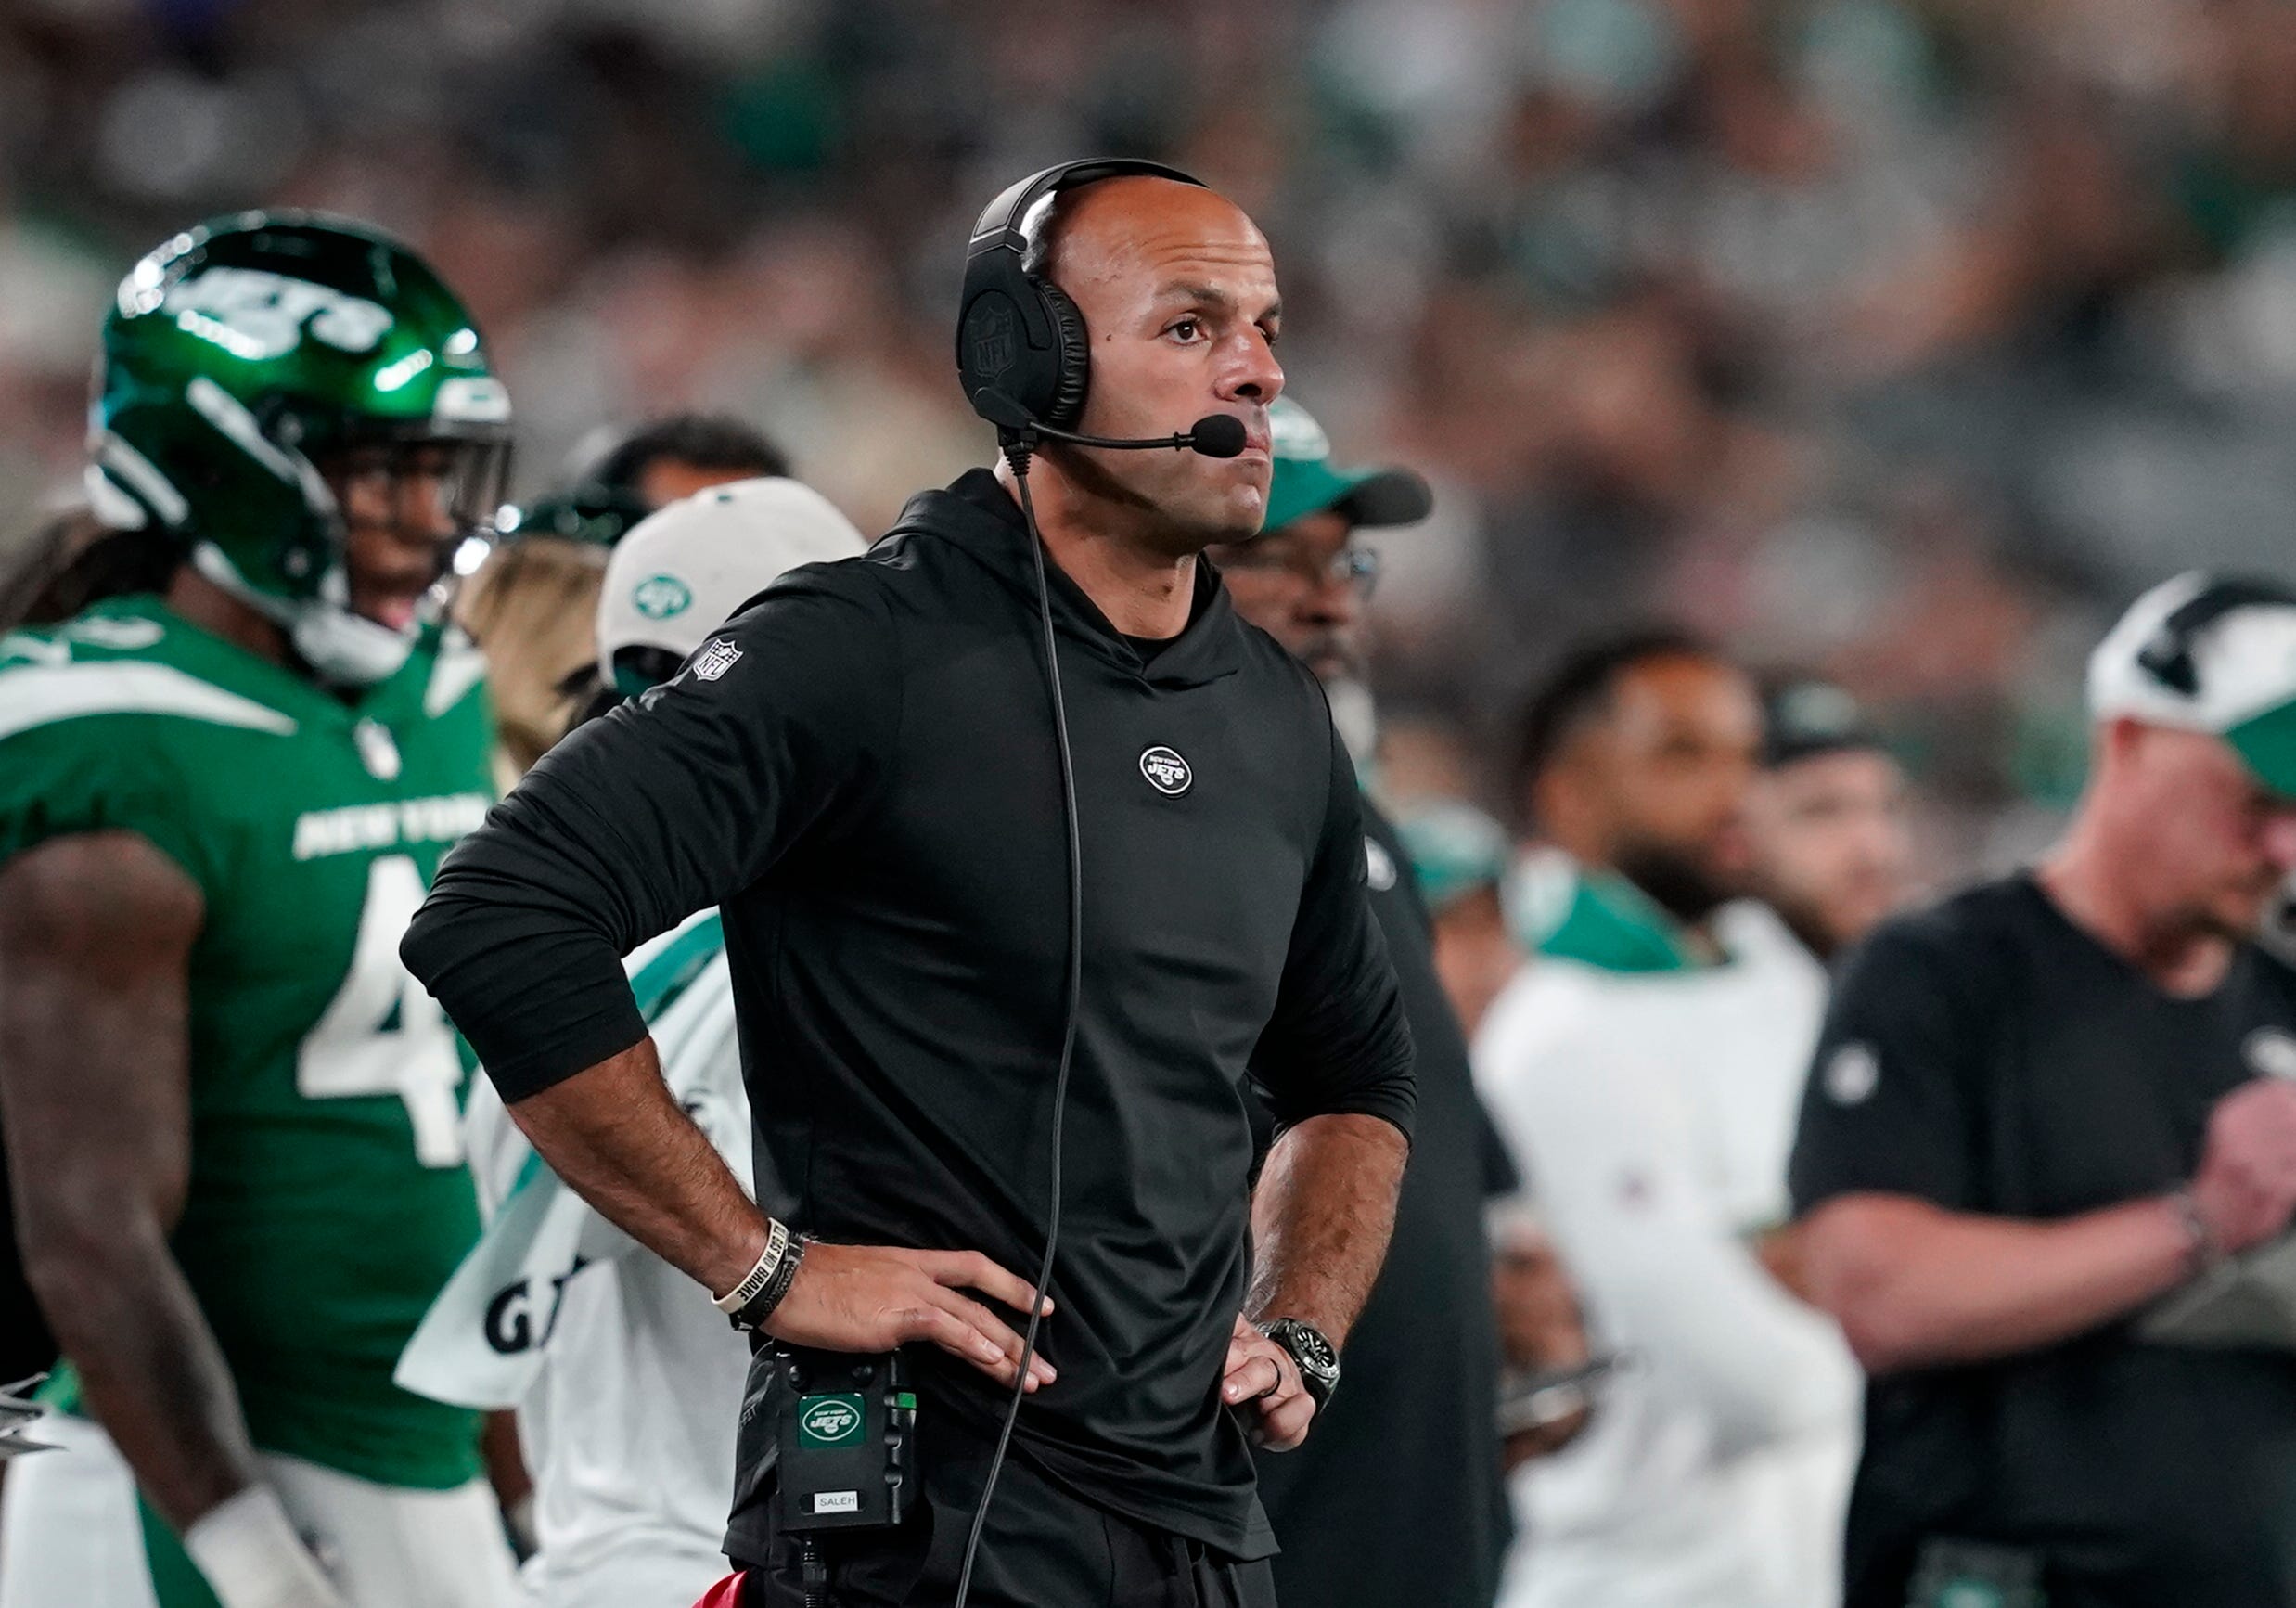 Who Is the New York Jets Head Coach?